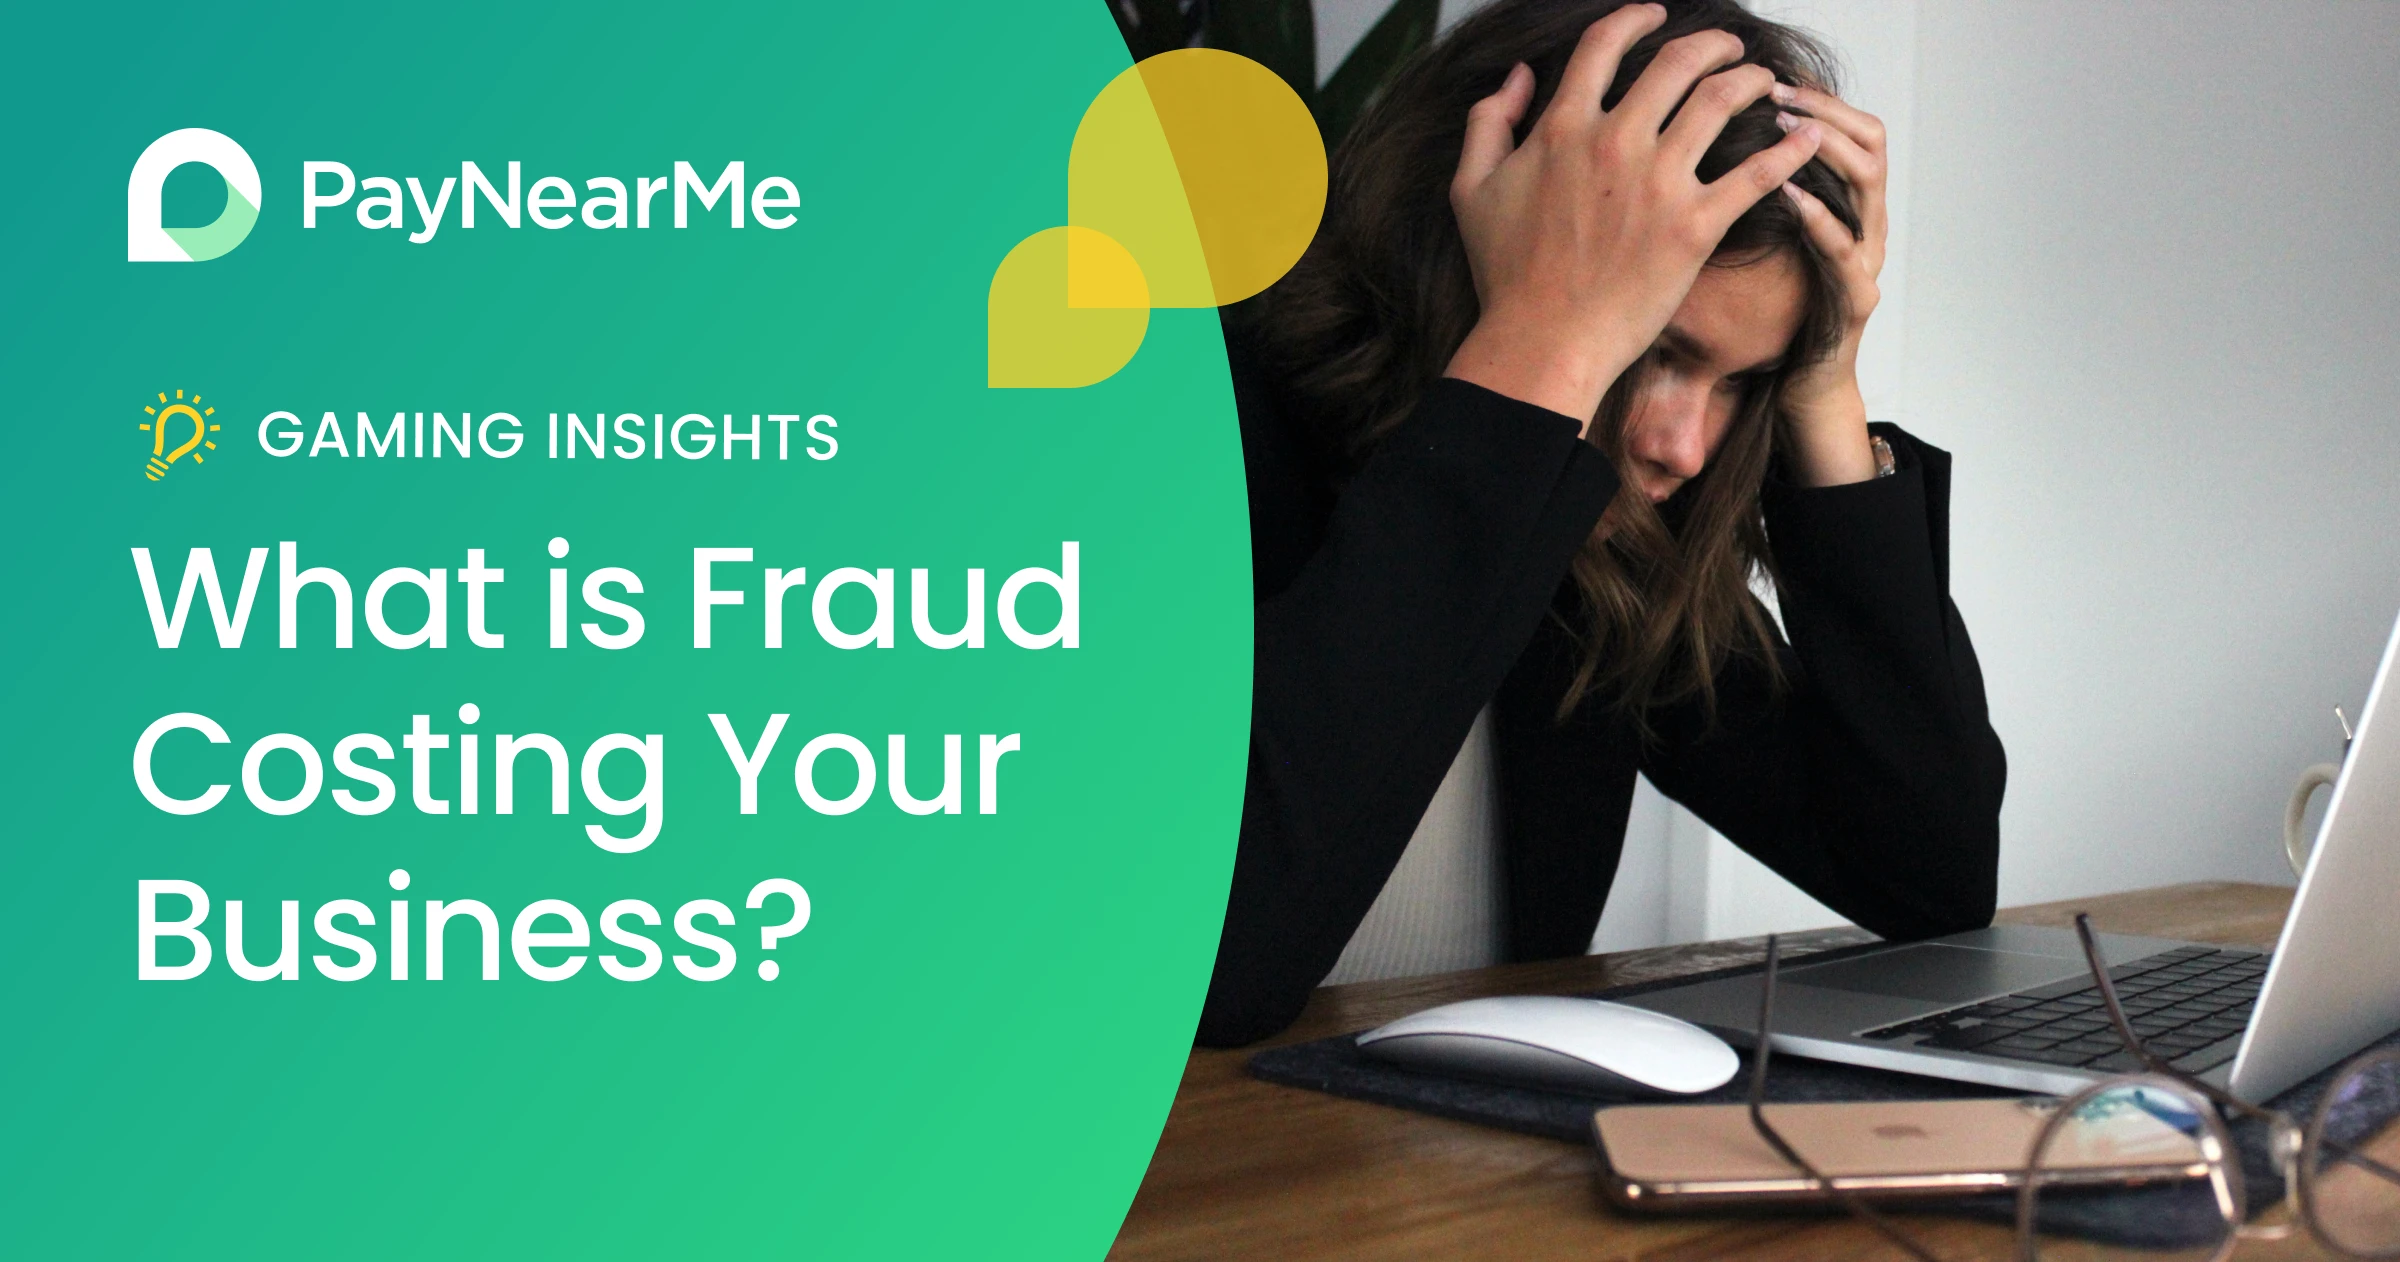 What is Fraud Costing Your Business?